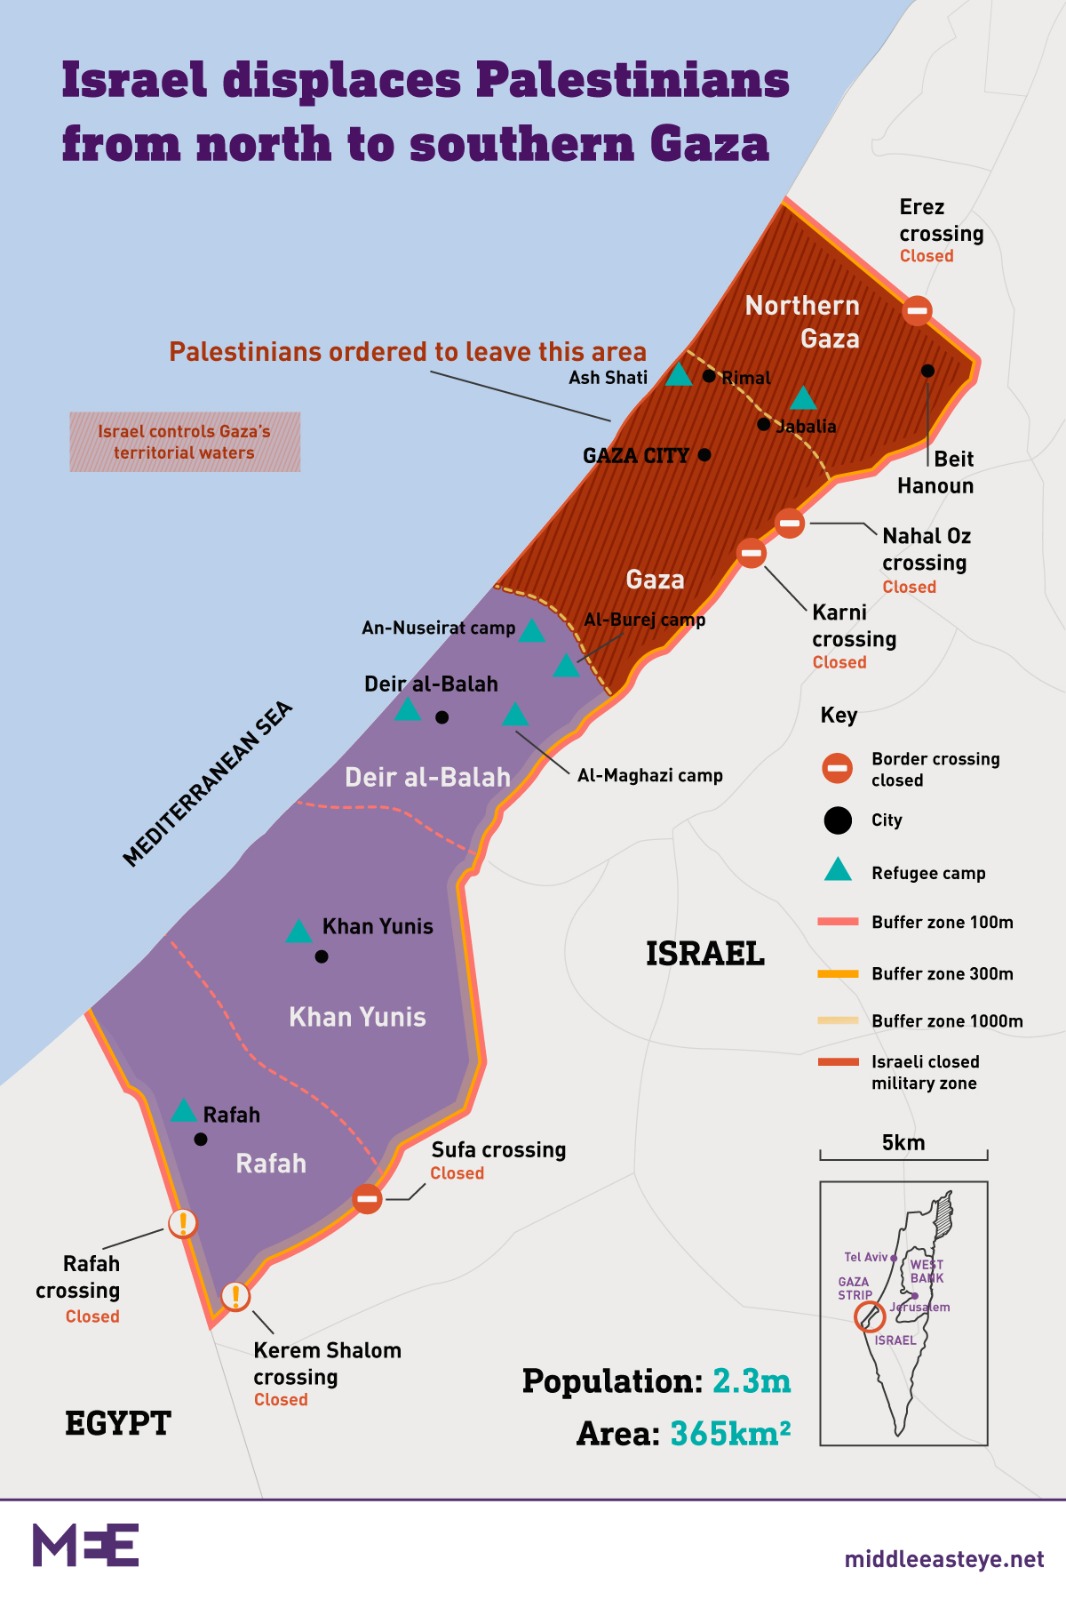 Israel displaces Palestinians from north to southern Gaza